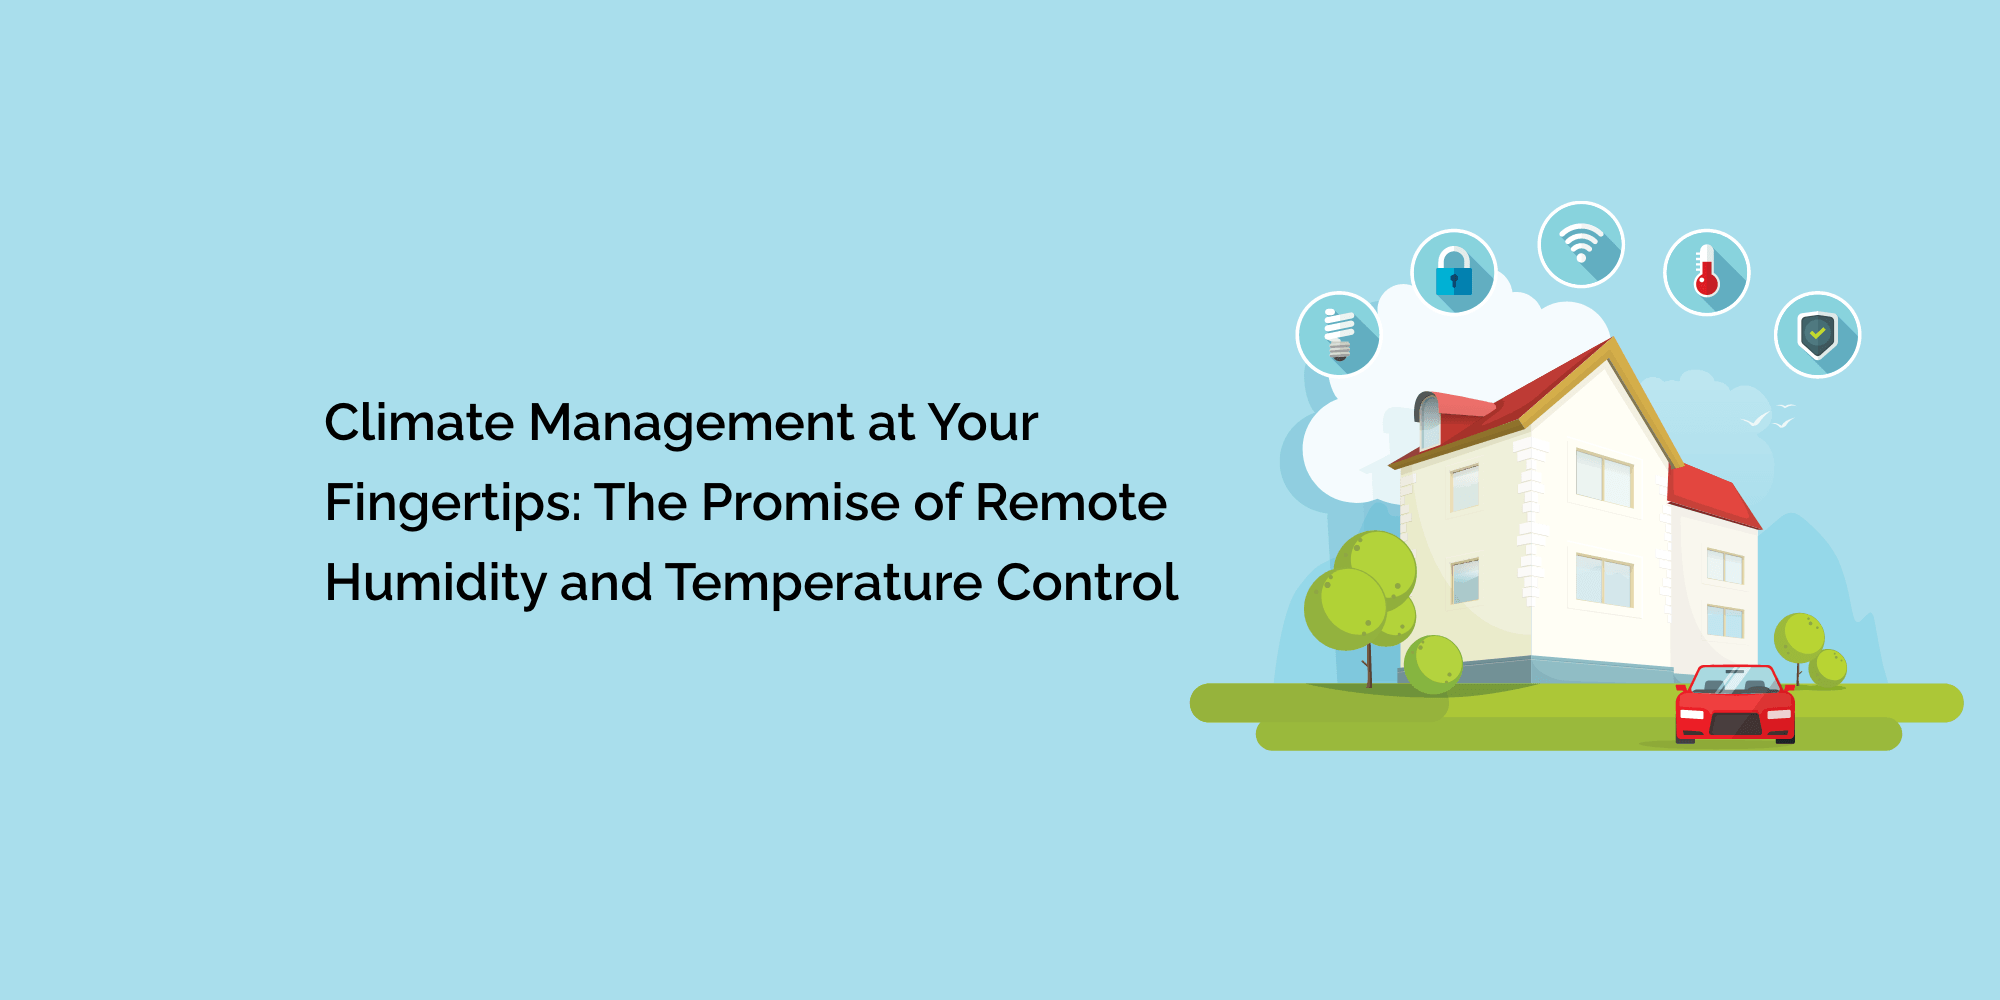 Climate Management at Your Fingertips: The Promise of Remote Humidity and Temperature Control